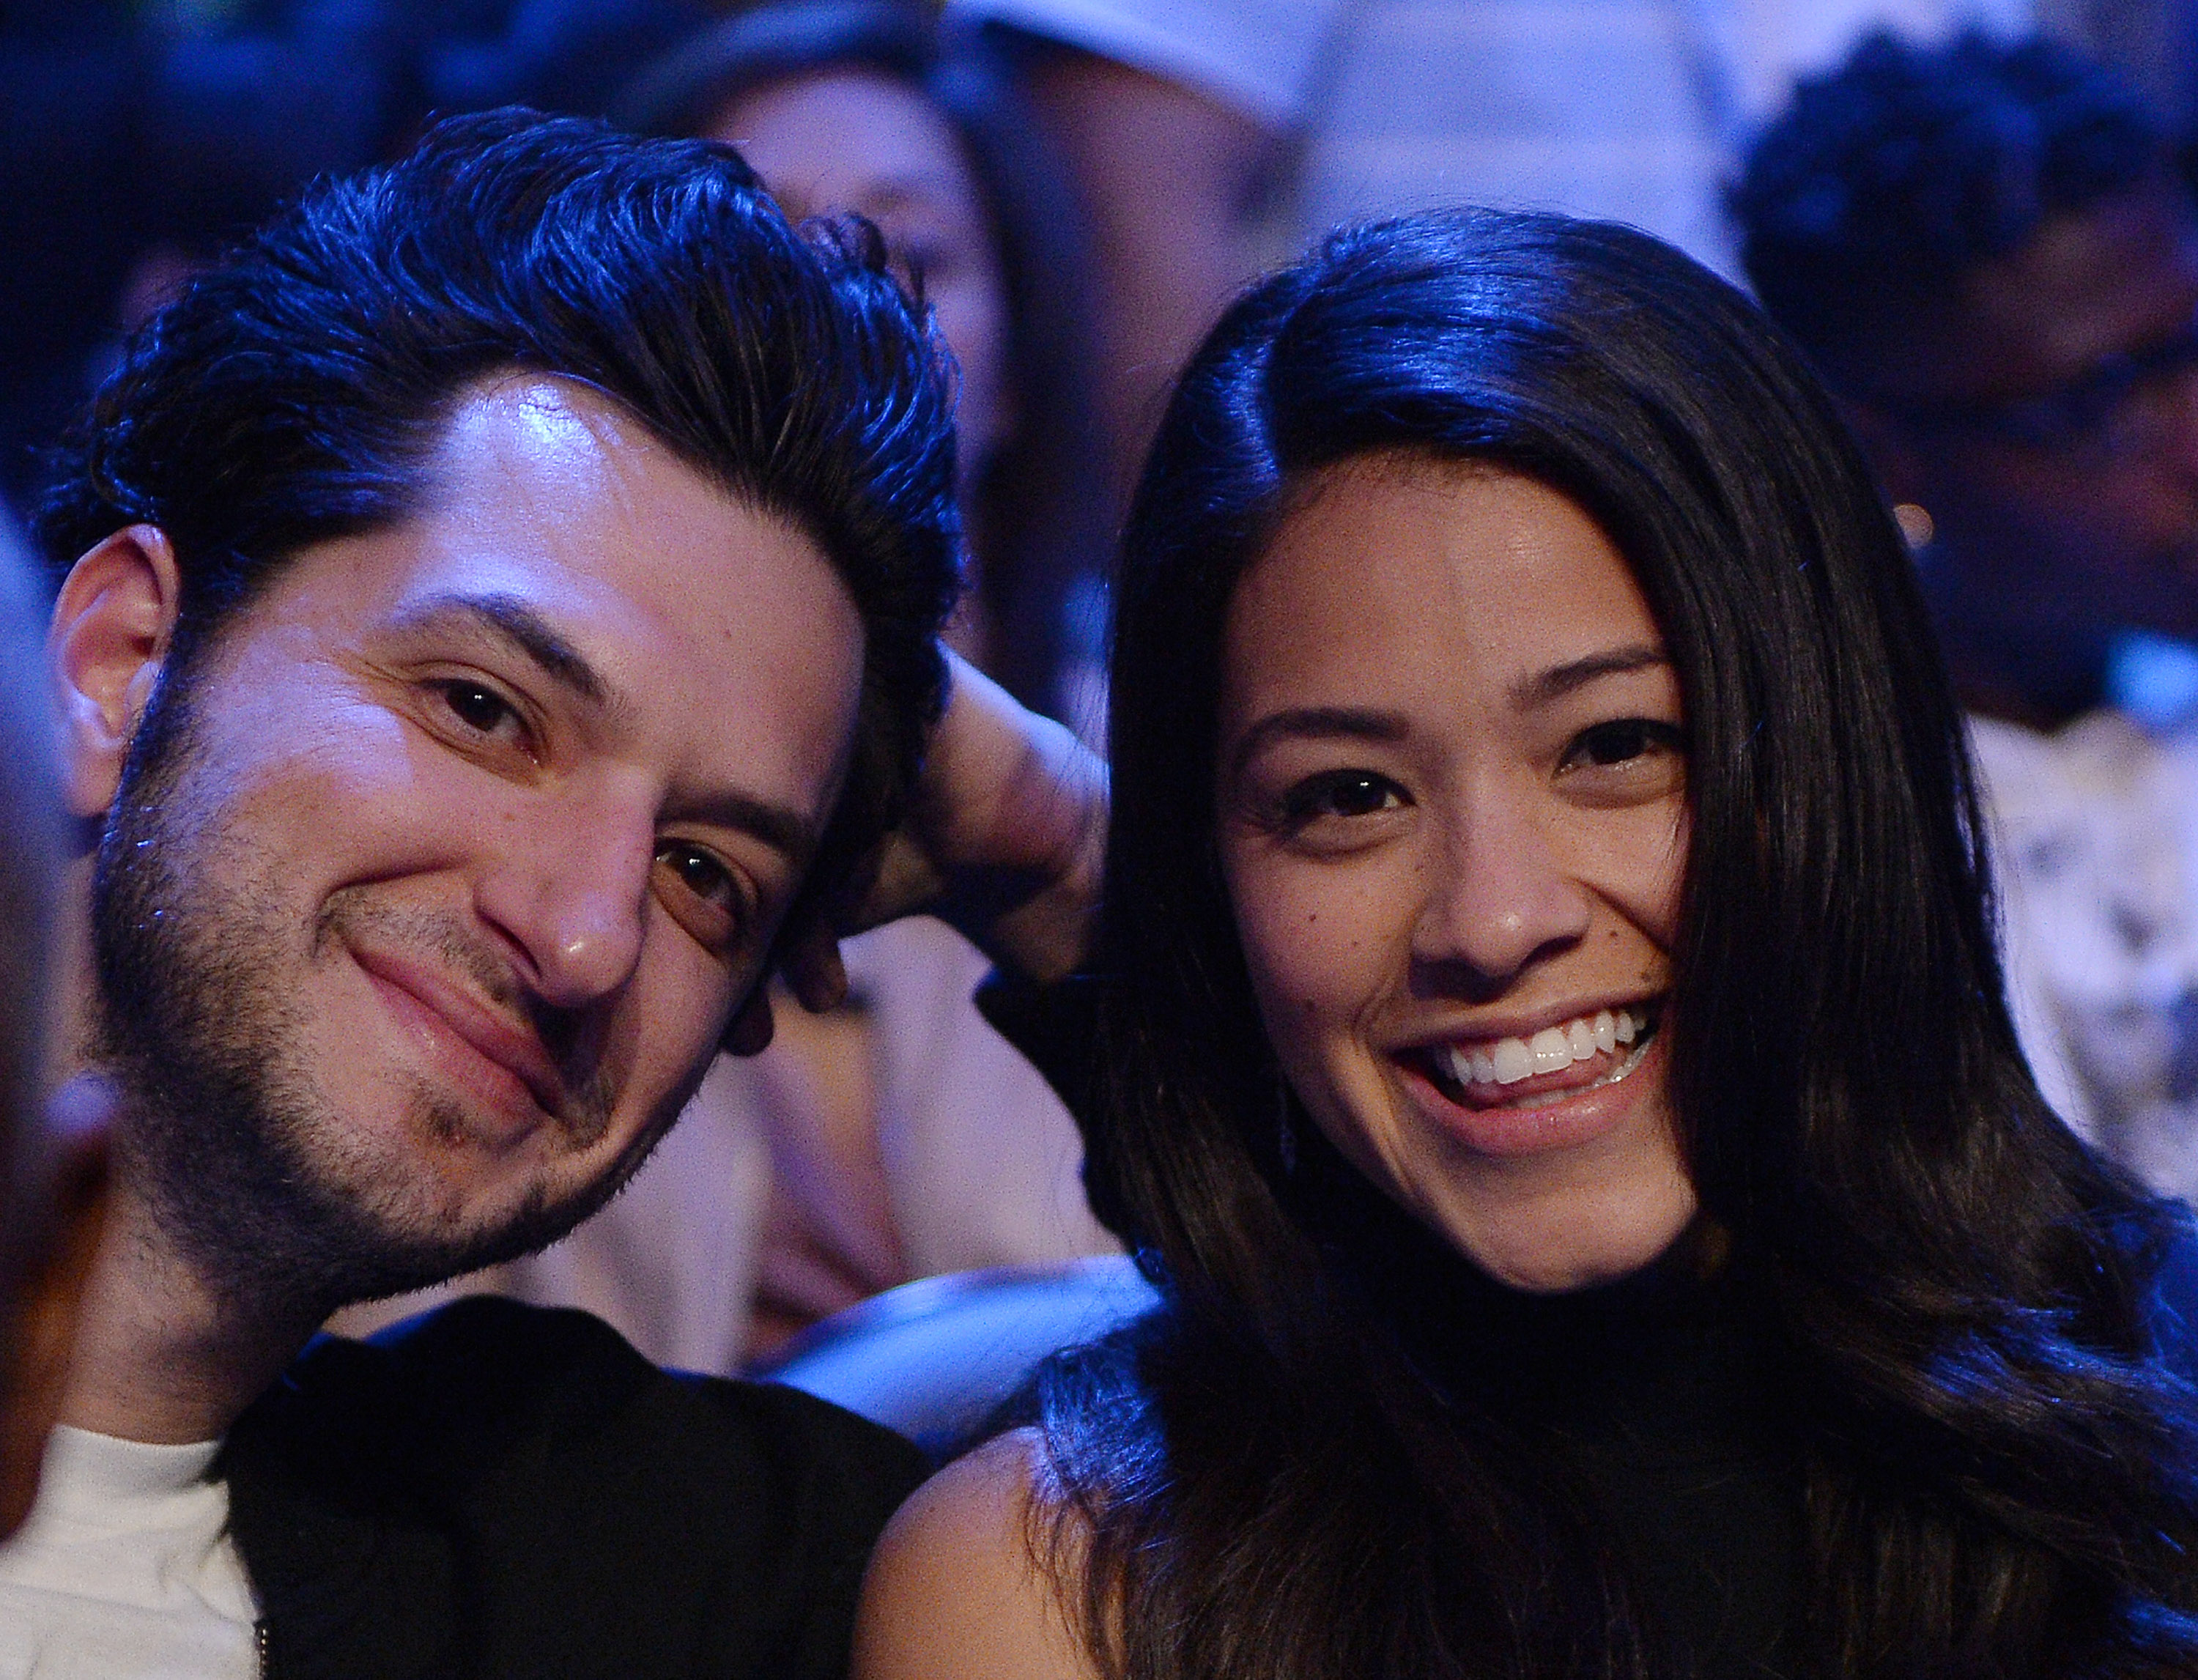 Ben Schwartz and Gina Rodriguez at the Danny Garcia and Robert Guerrero WBC championship bout in 2016, in Los Angeles, California. | Source: Getty Images